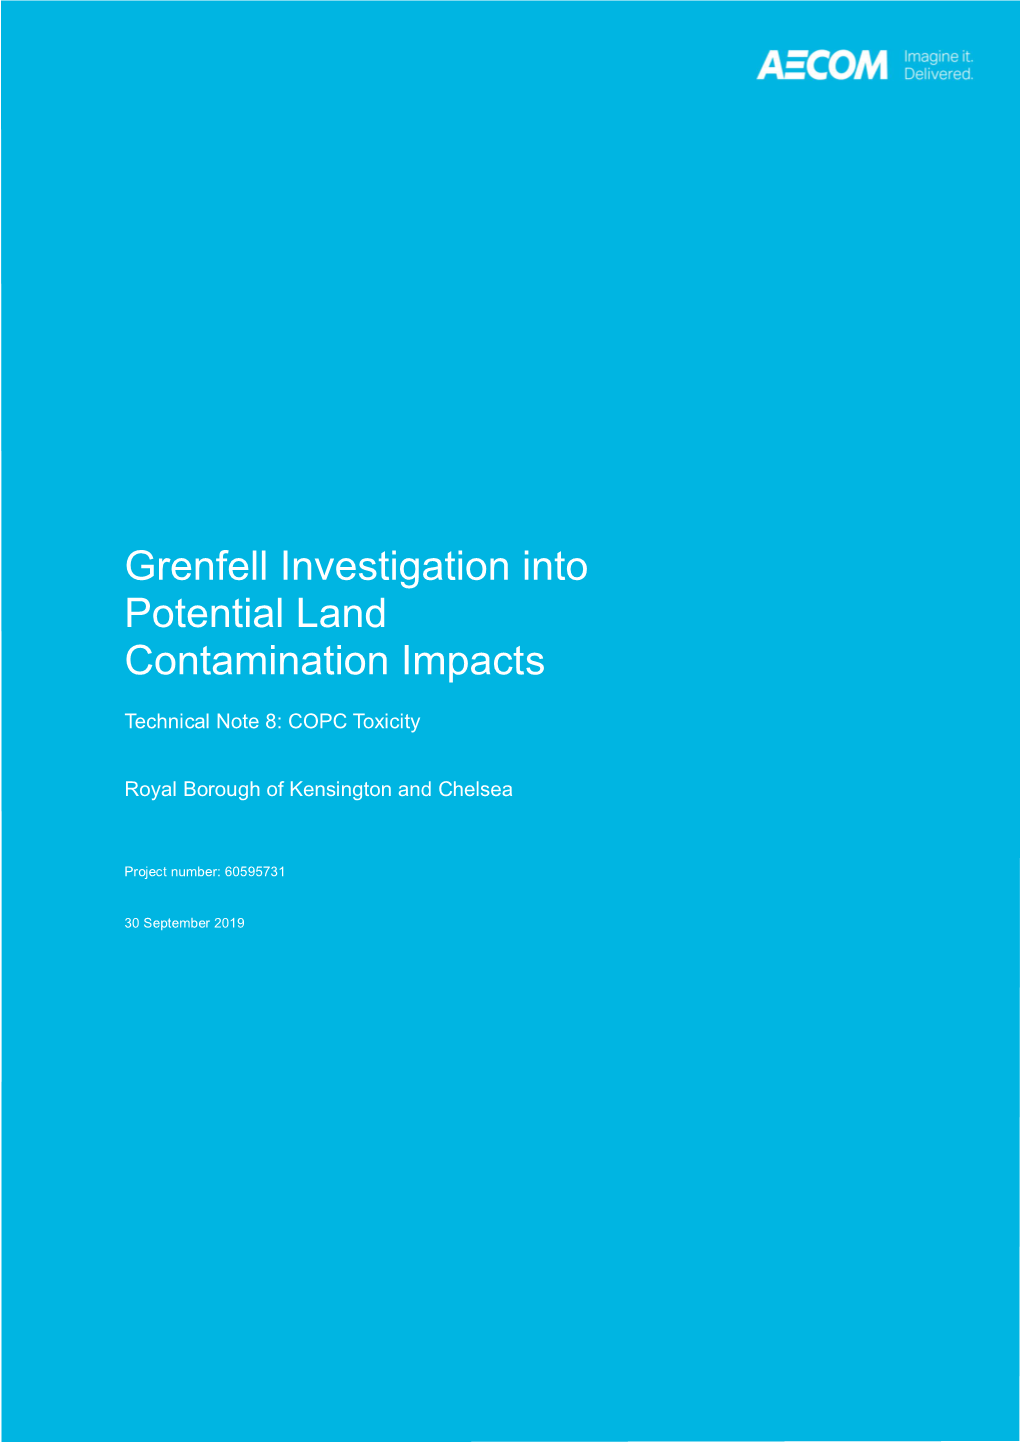 Grenfell Investigation Into Potential Land Contamination Impacts